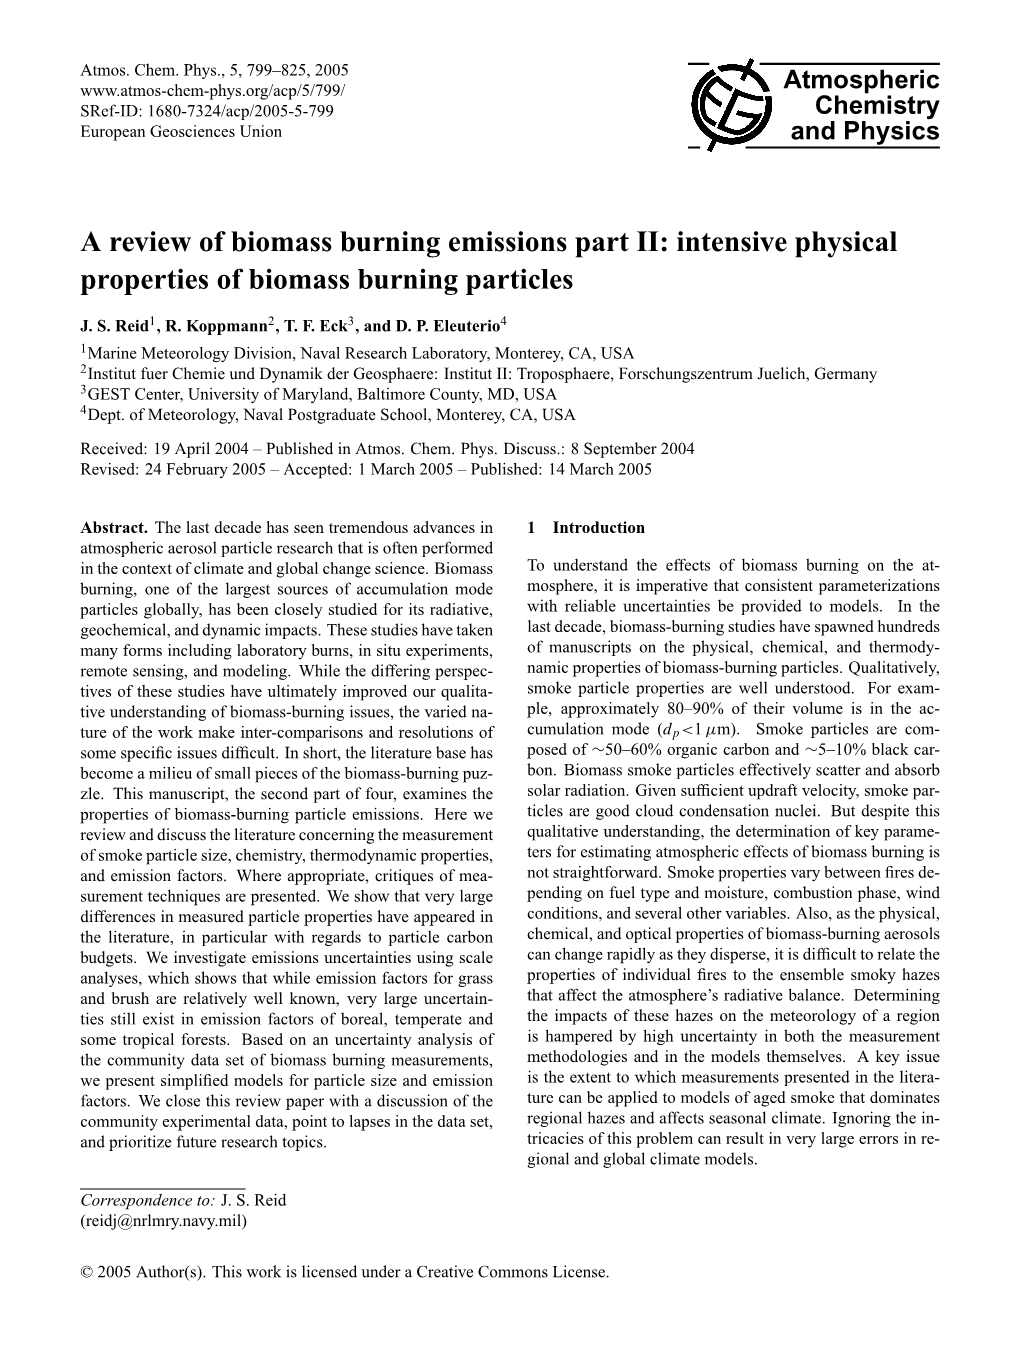 Intensive Physical Properties of Biomass Burning Particles